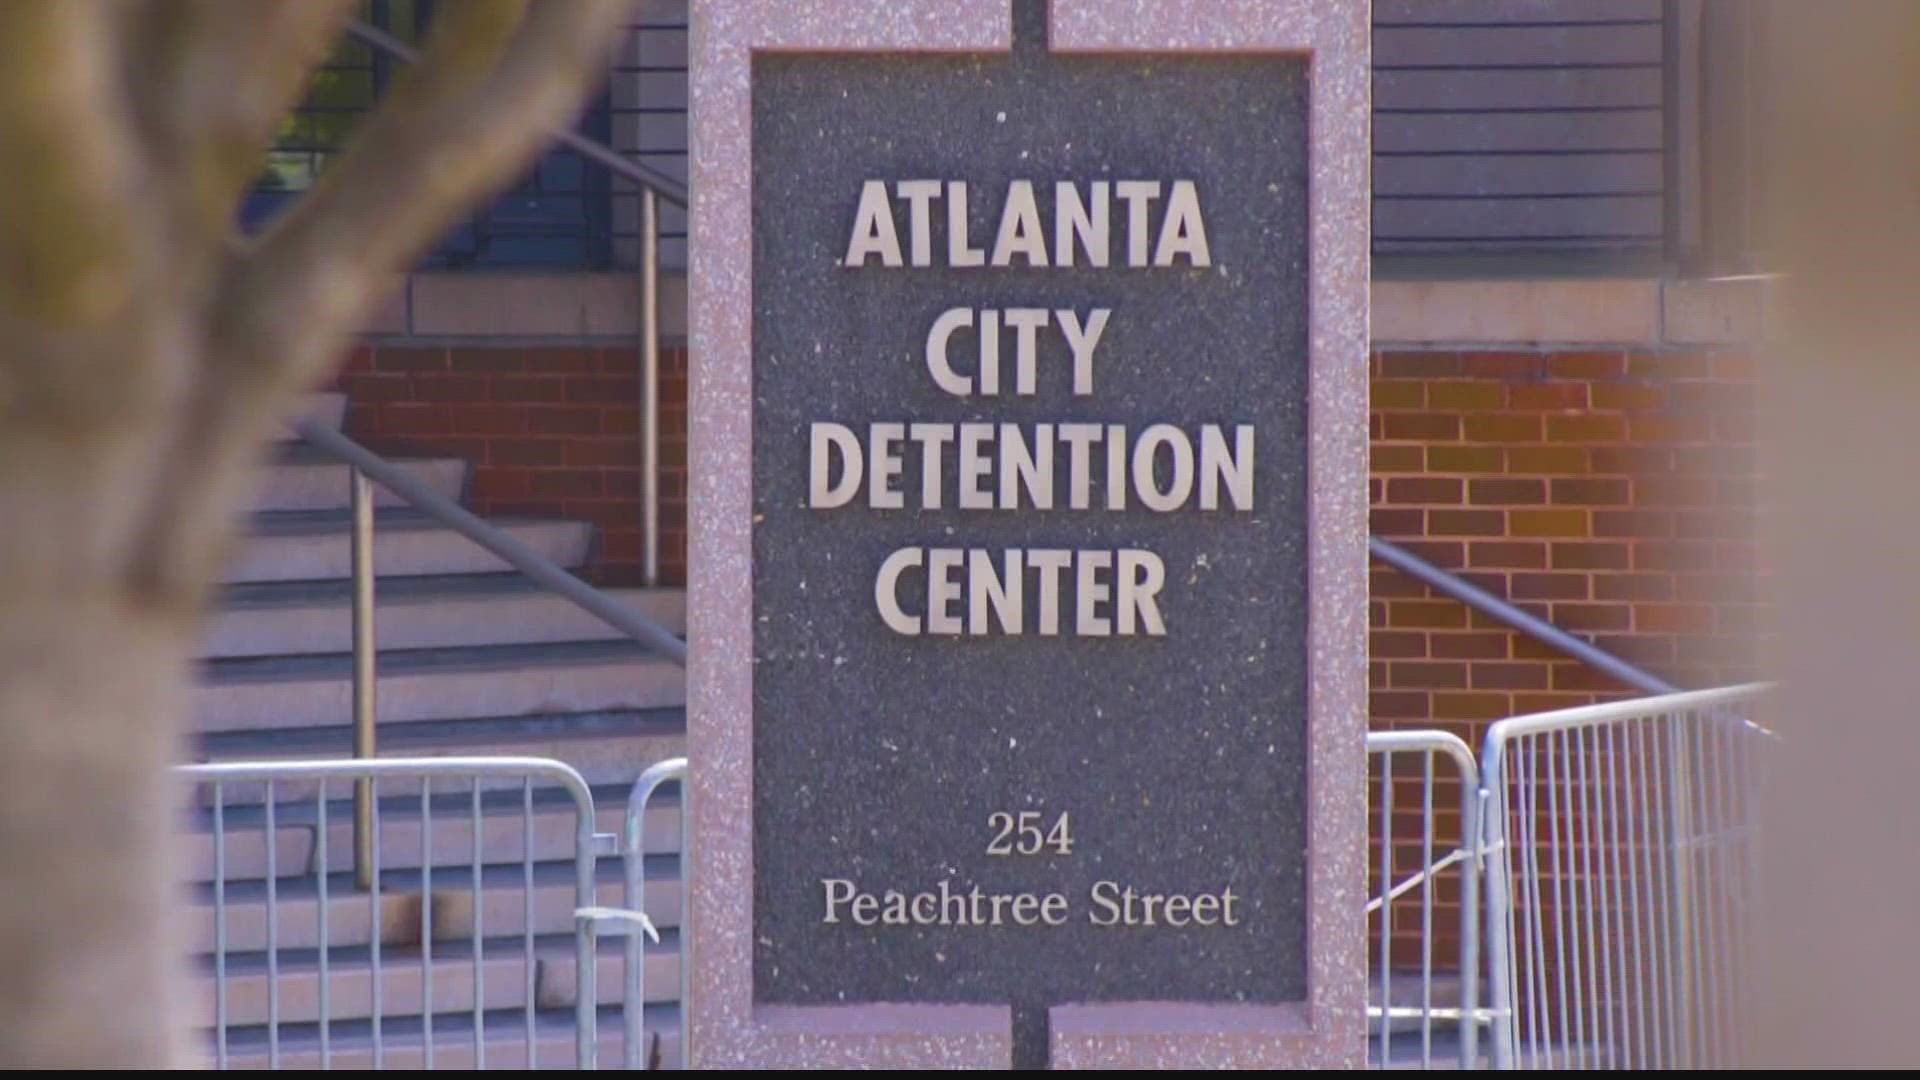 Atlanta City Council approved $3 million to start the construction of the Center for Diversion Services.